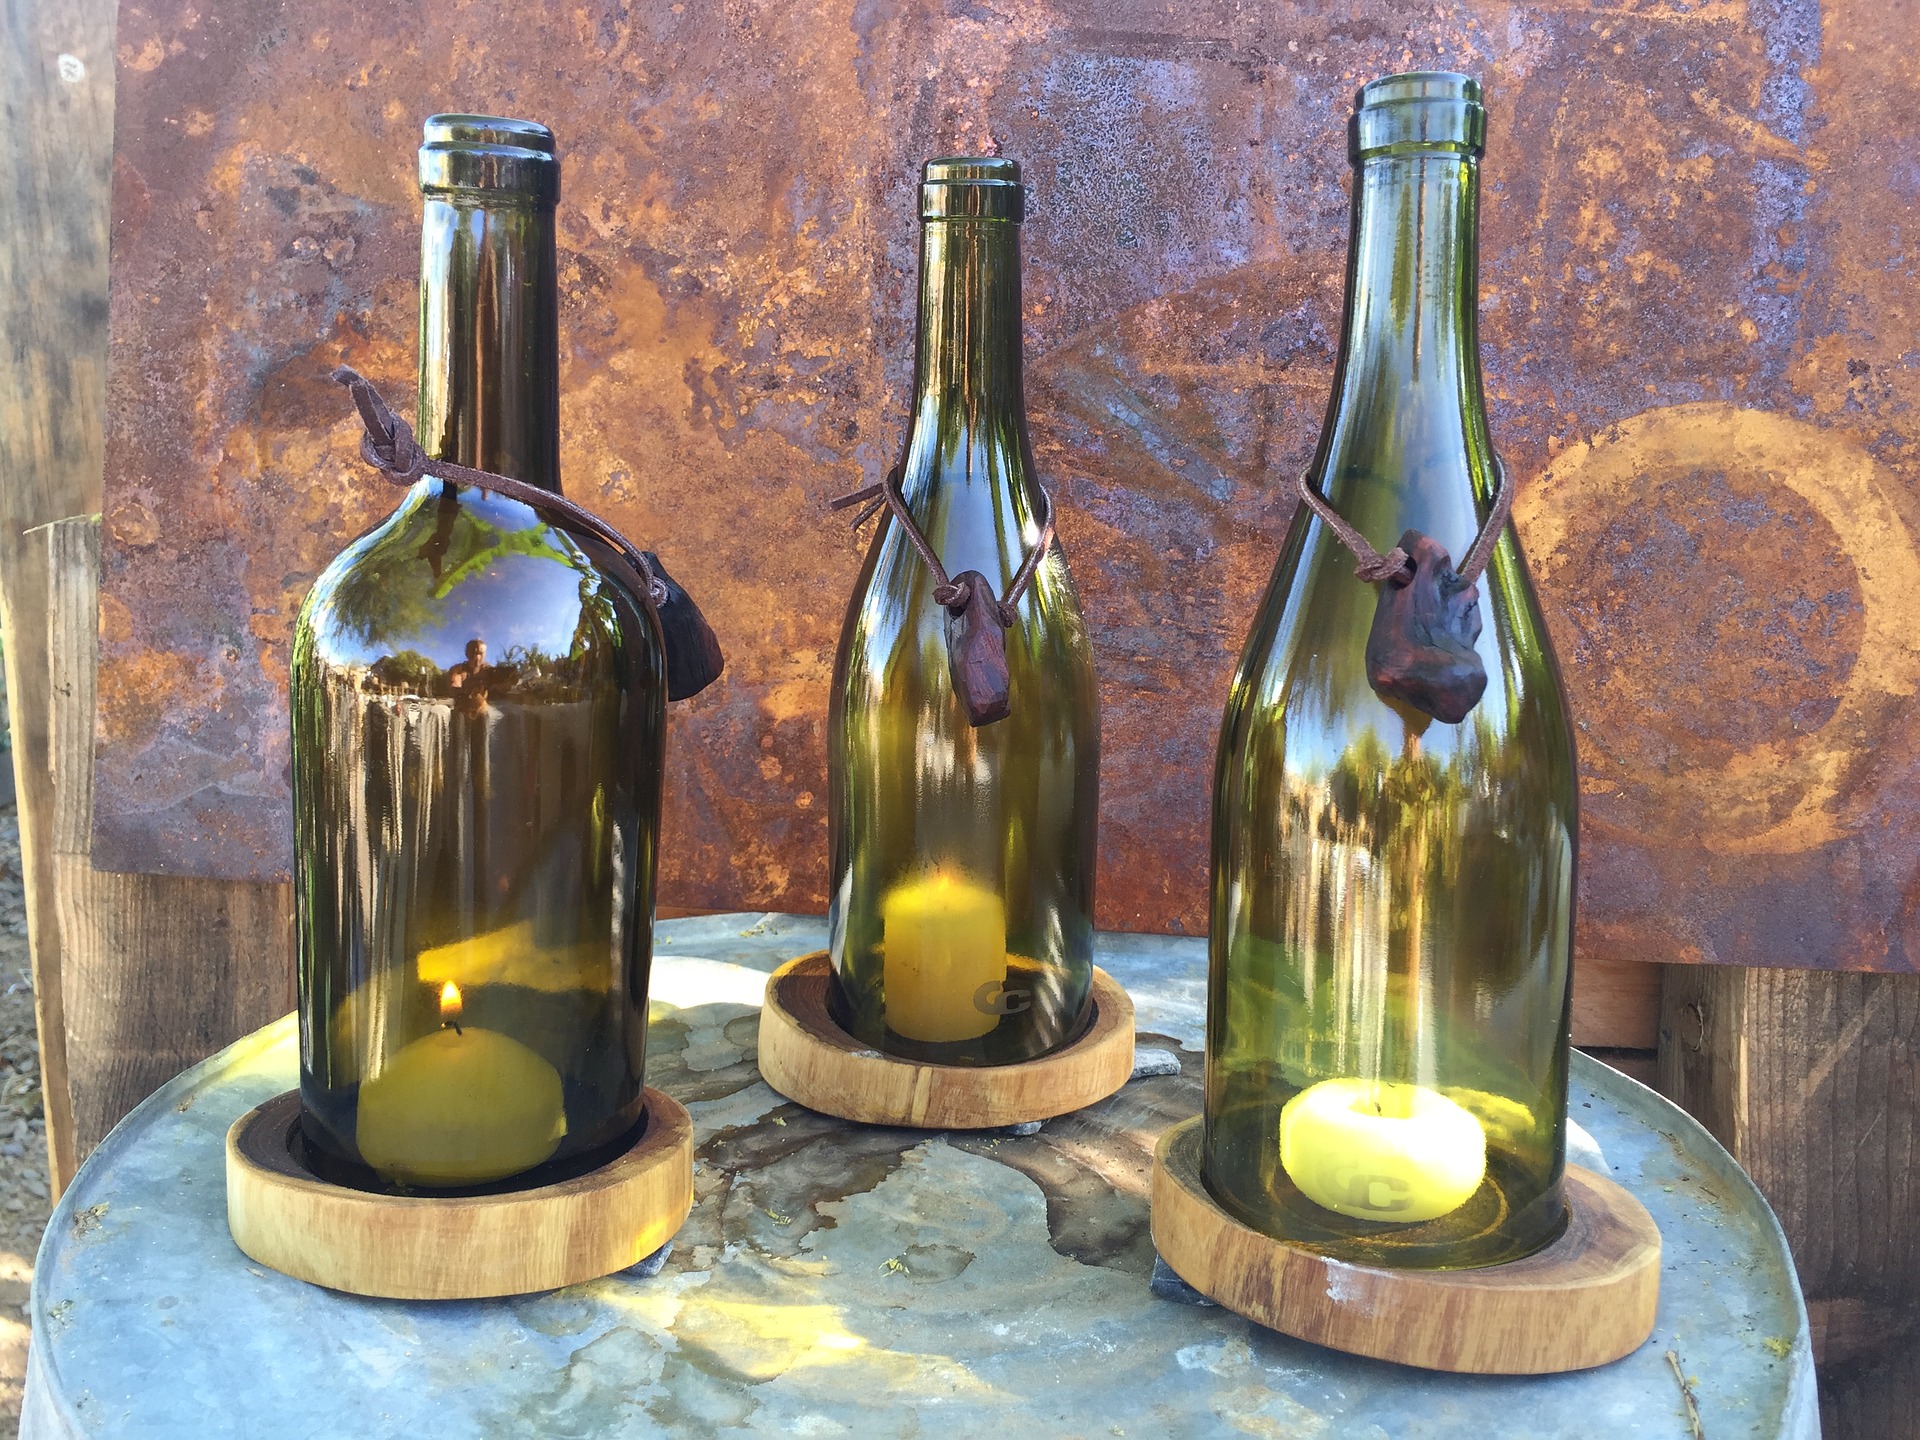 Three candles sit inside three wine bottles, each sitting on a wood coaster.